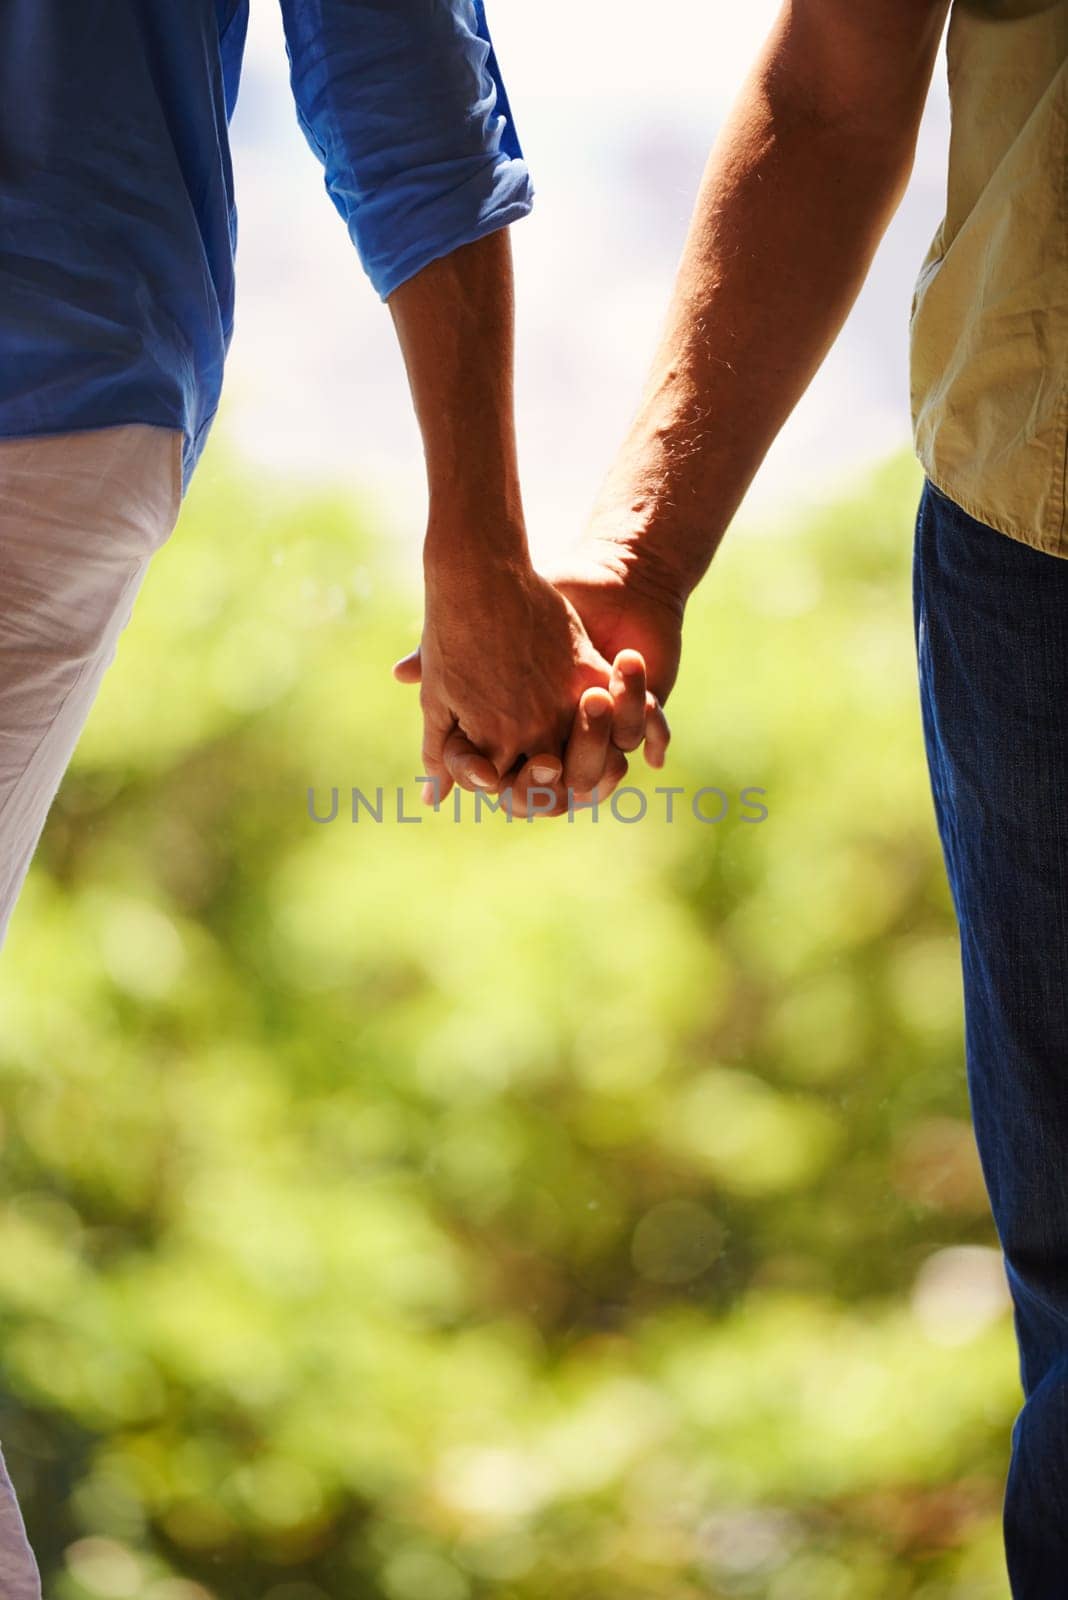 Couple, holding hands and bonding together outdoor for romance and commitment in healthy relationship. People, love and holiday with touch for care, security and walking for date in countryside.